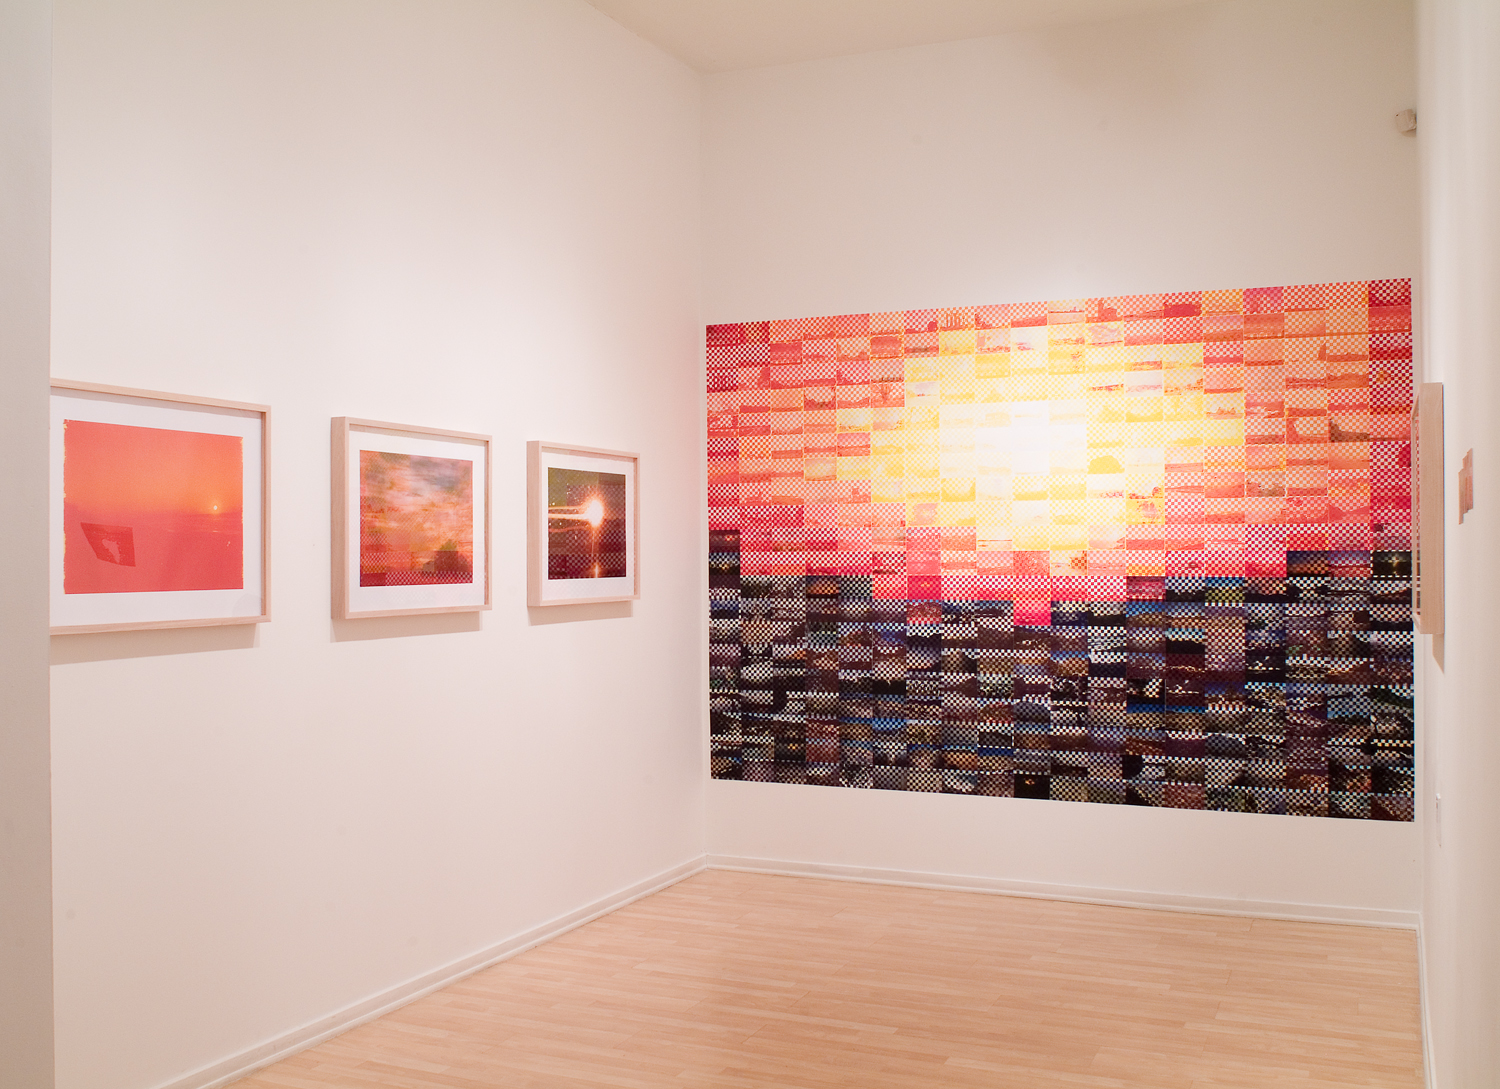 Installation view, Minnesota Center for Photography, 2007